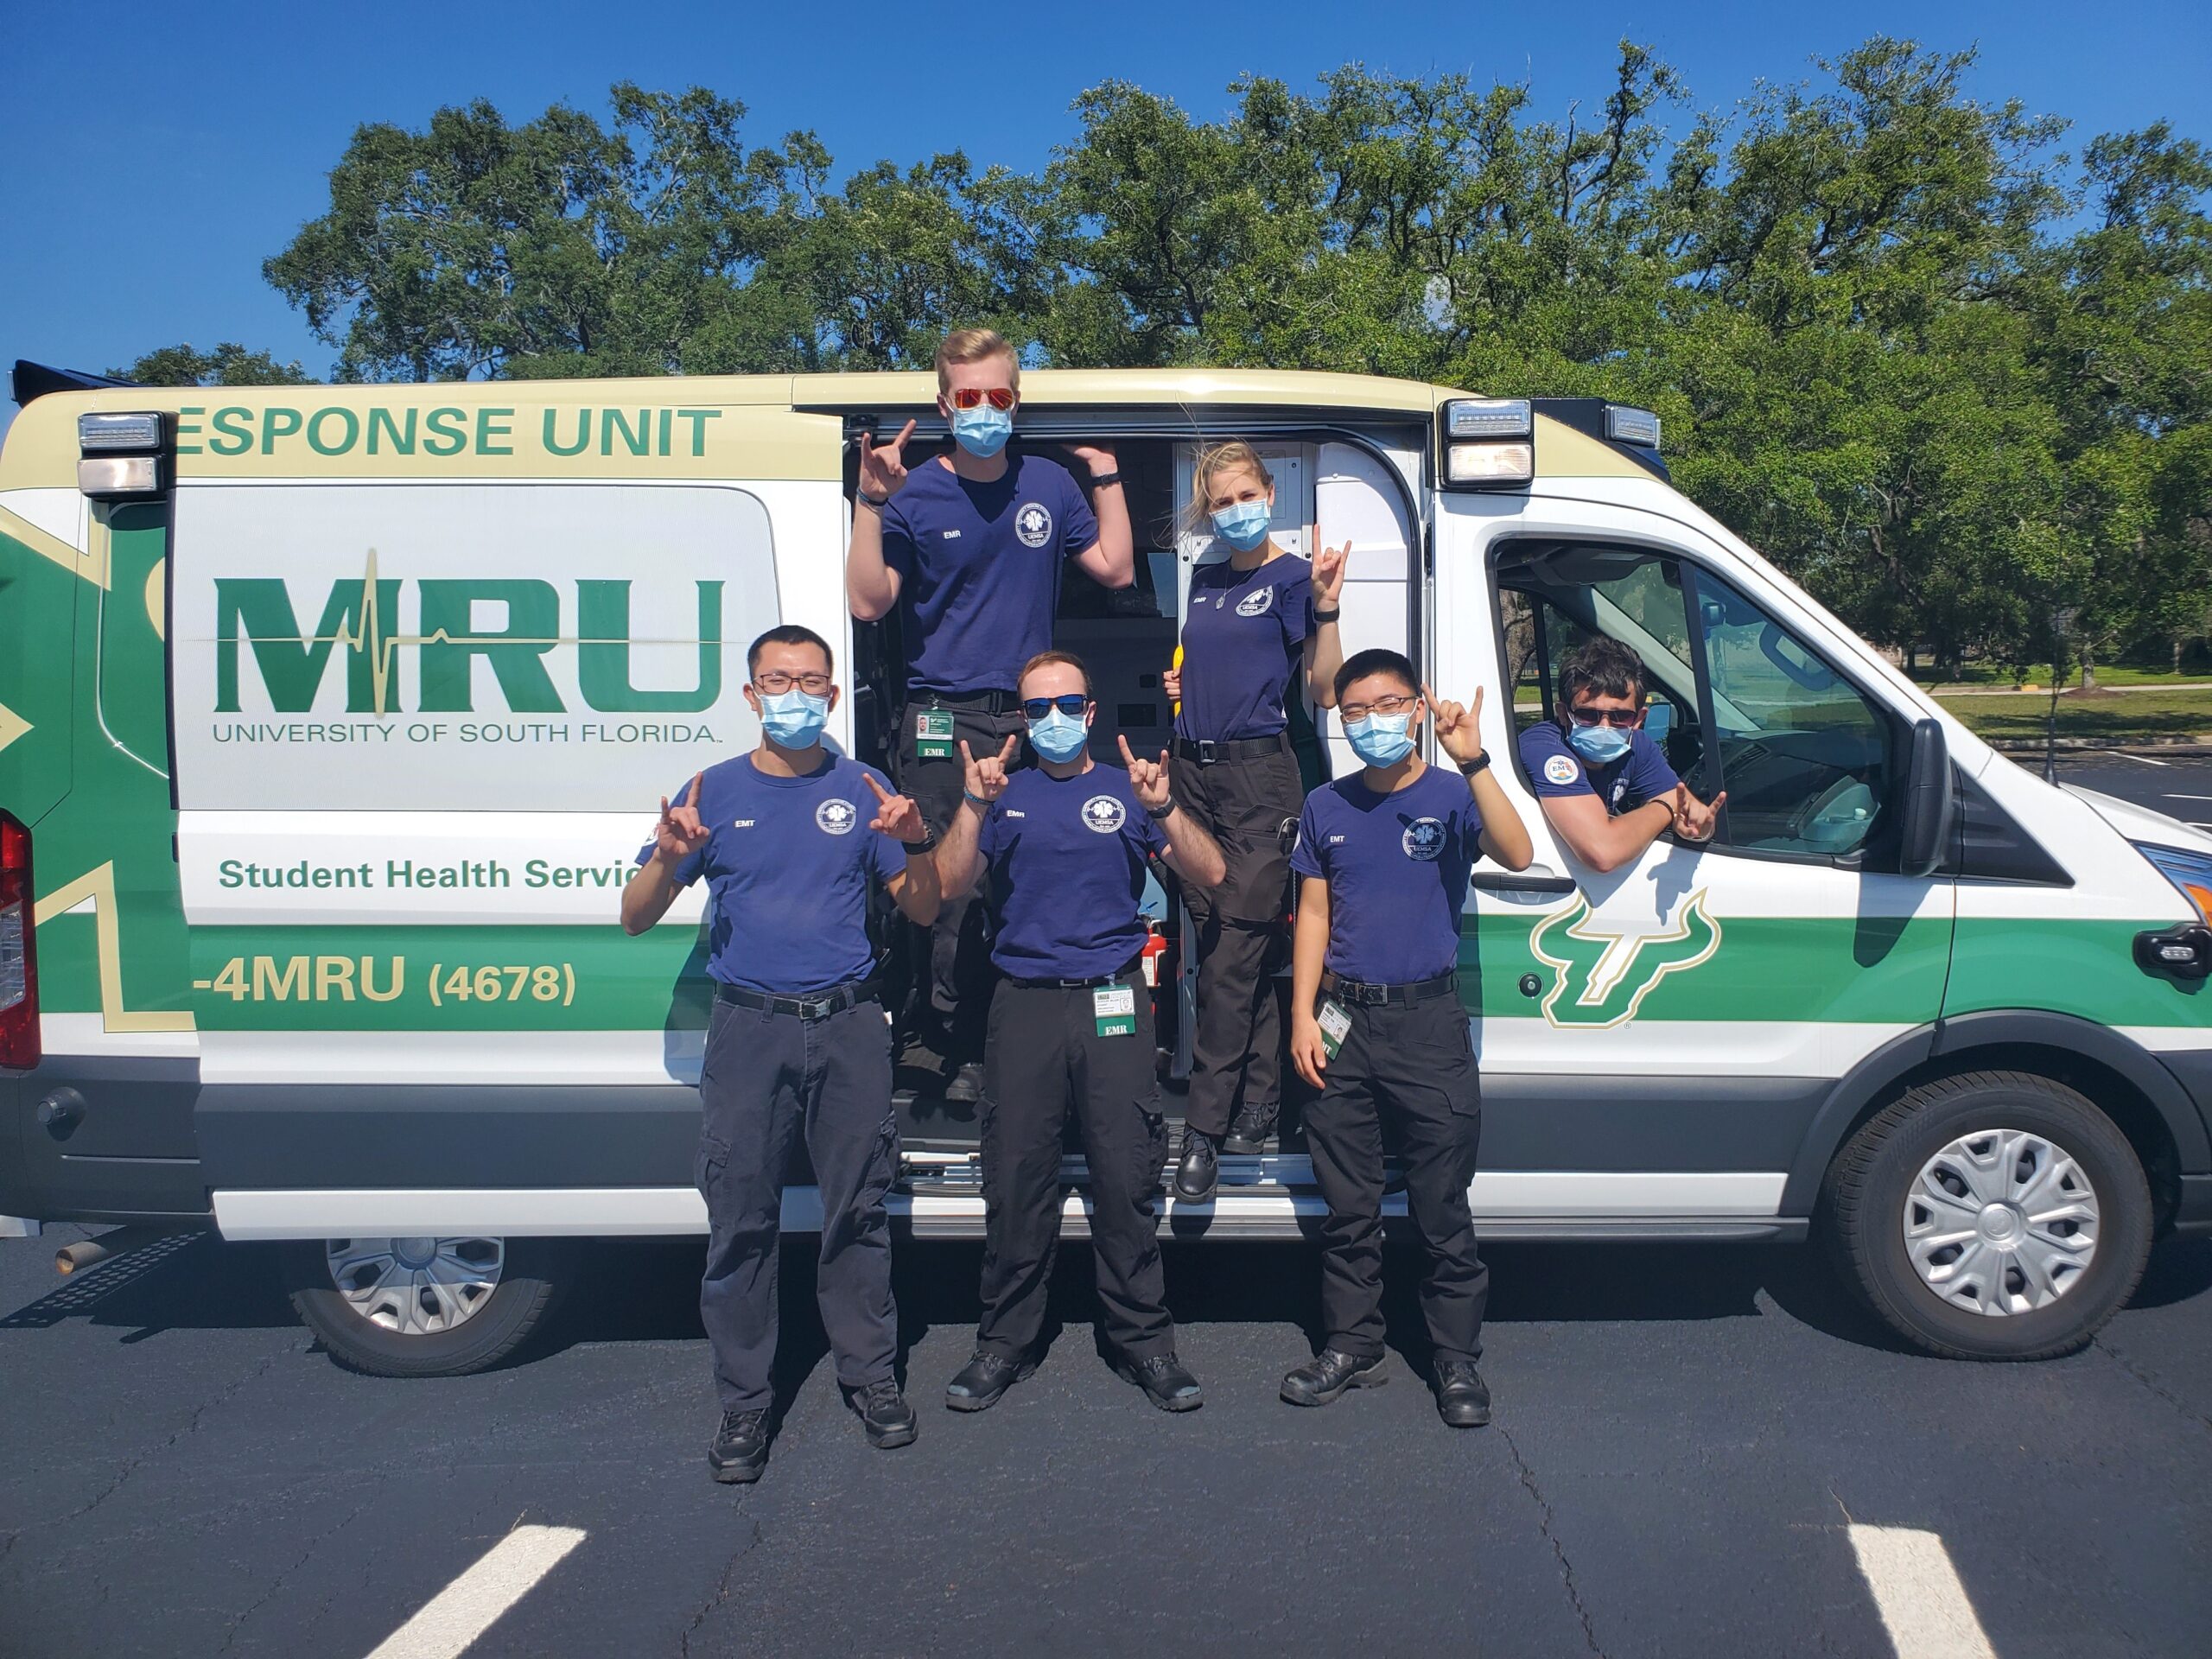 Medical Response Unit contributes to COVID-19-related services